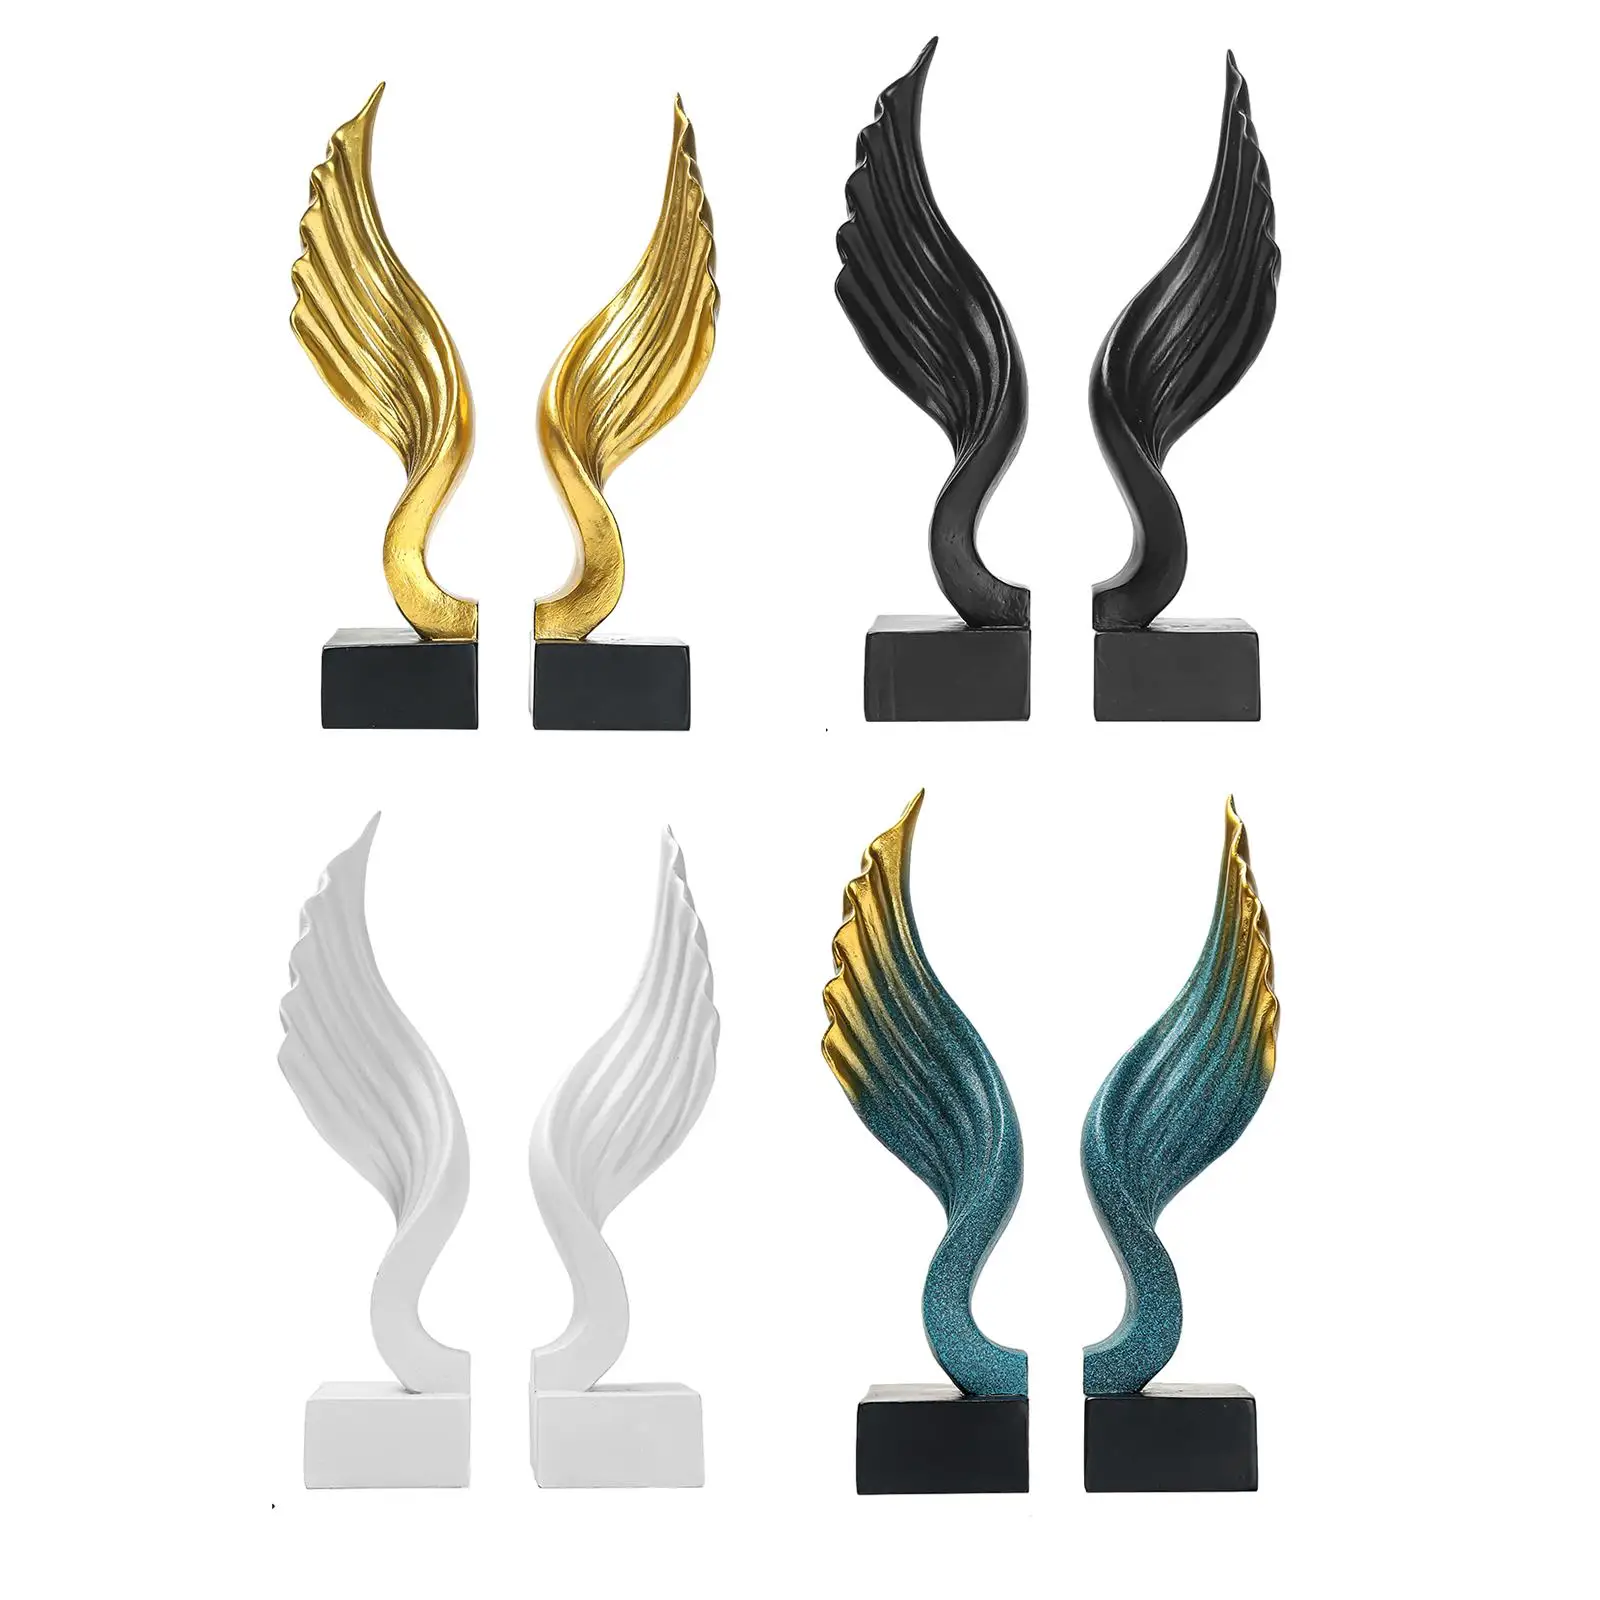 Angel Wing Book Stand Bookends Statue Decoration Functional Book Holders Resin Ornament for Library Desktop Decor Accessories